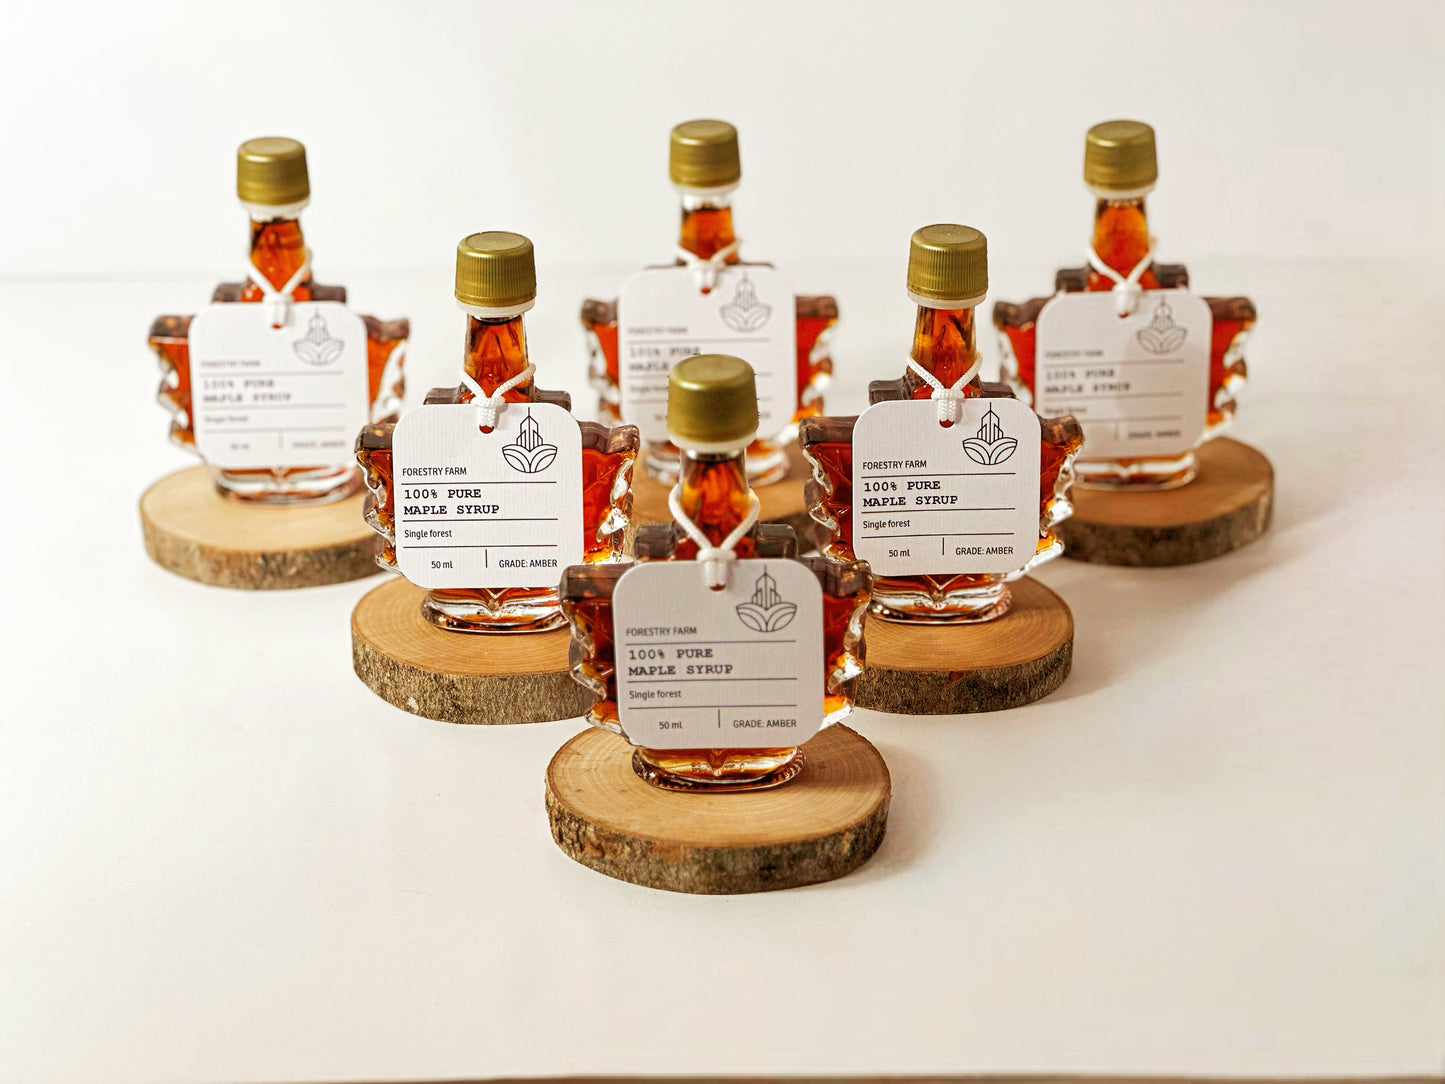 BULK ORDER Pure Canadian Maple Syrup in 50ml Maple Leaf-Shaped Bottle - Artisanal, Sustainable, Exceptional Quality - Perfect Gift for Events